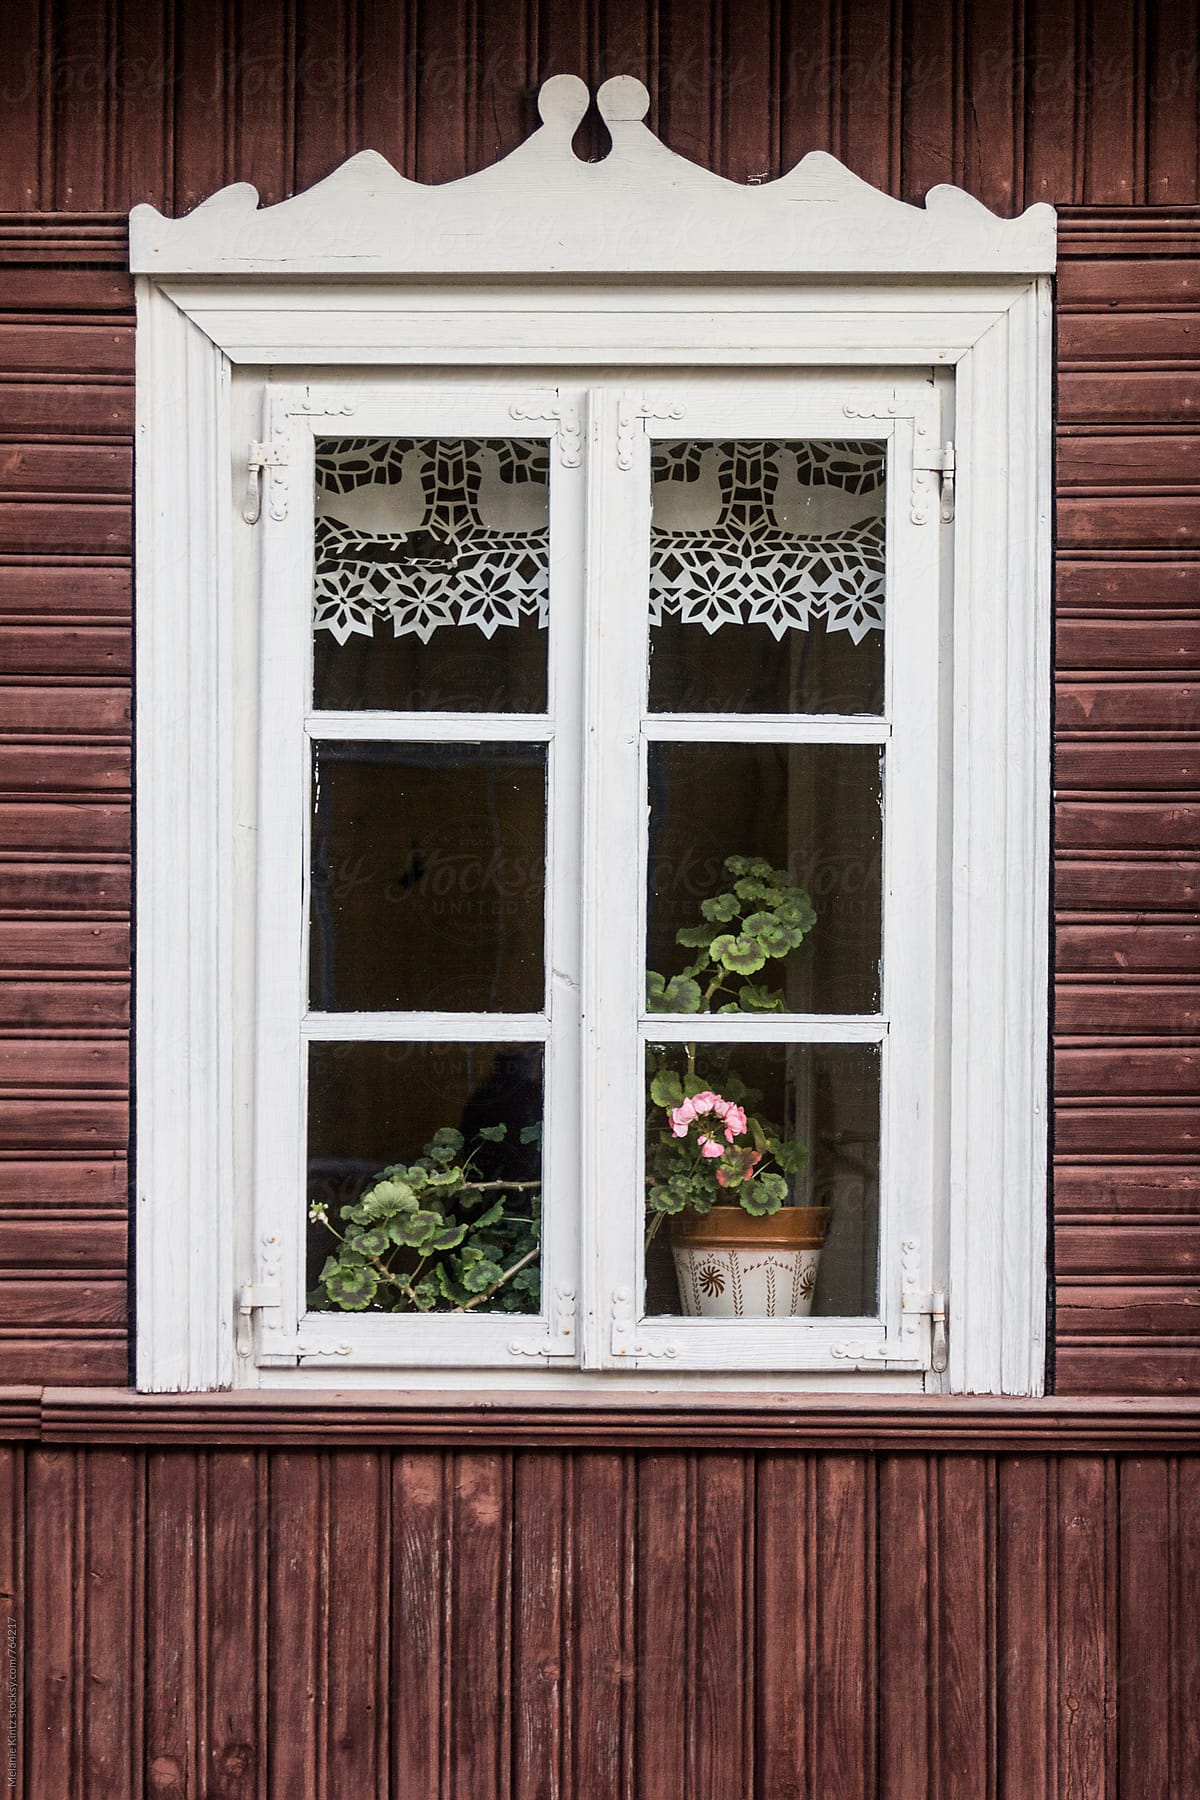 Geranium in the window of a traditional Lithuanian wooden house